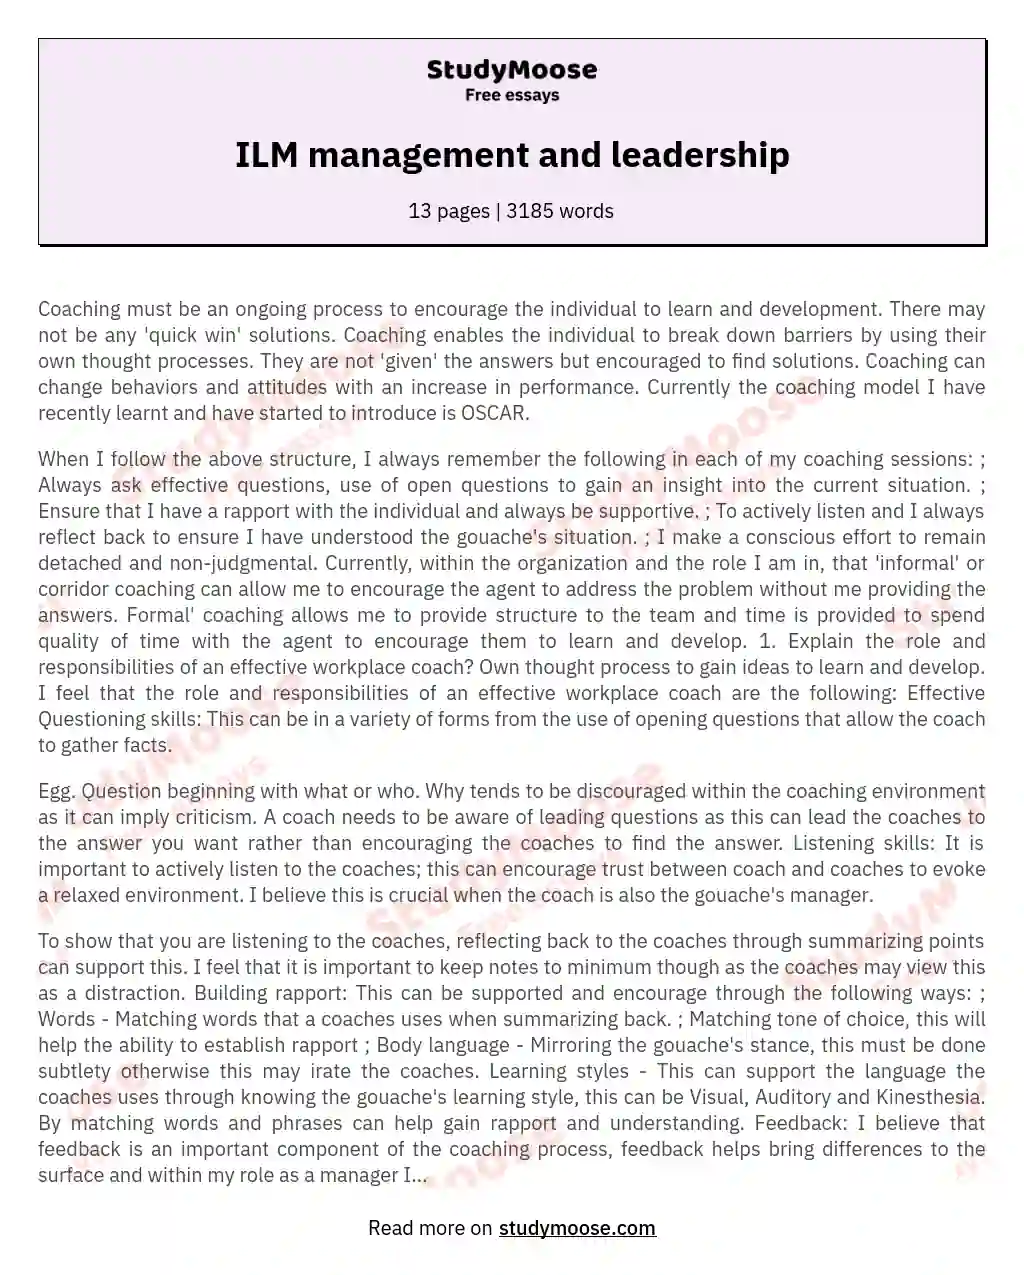 ilm level 4 leadership and management assignment examples